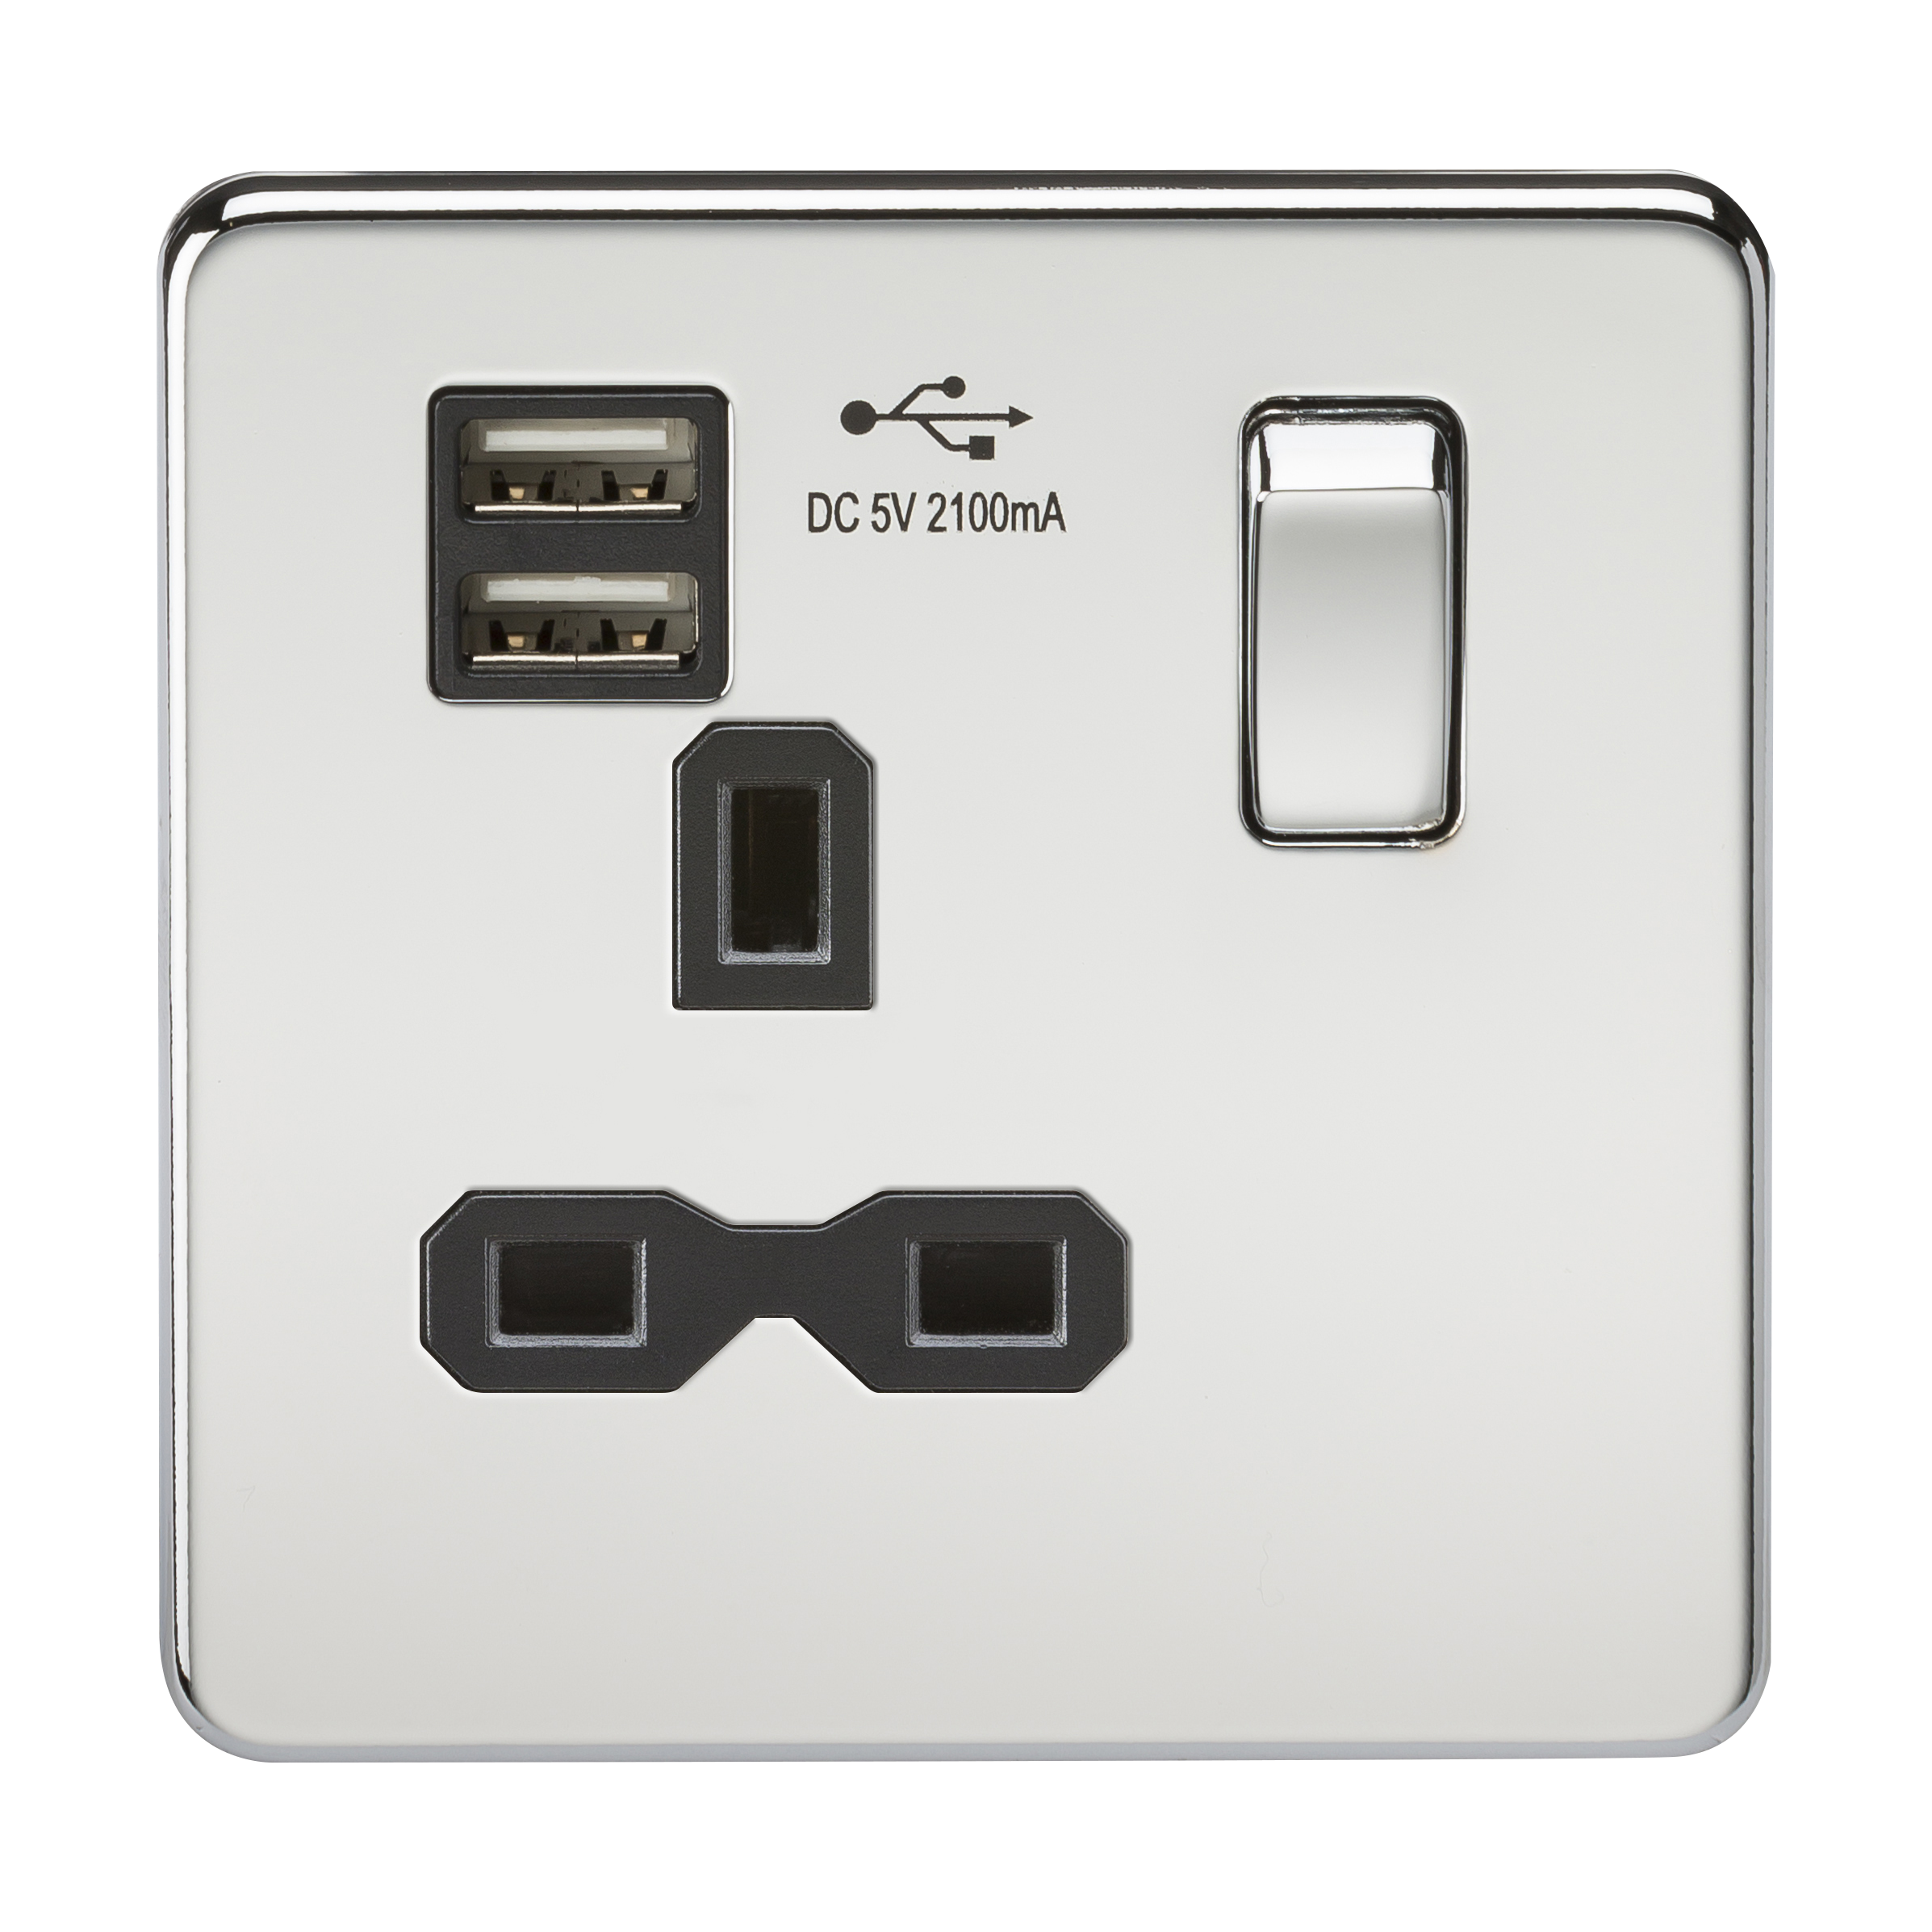 Screwless 13A 1G Switched Socket With Dual USB Charger (2.1A) - Polished Chrome With Black Insert - SFR9901PC 